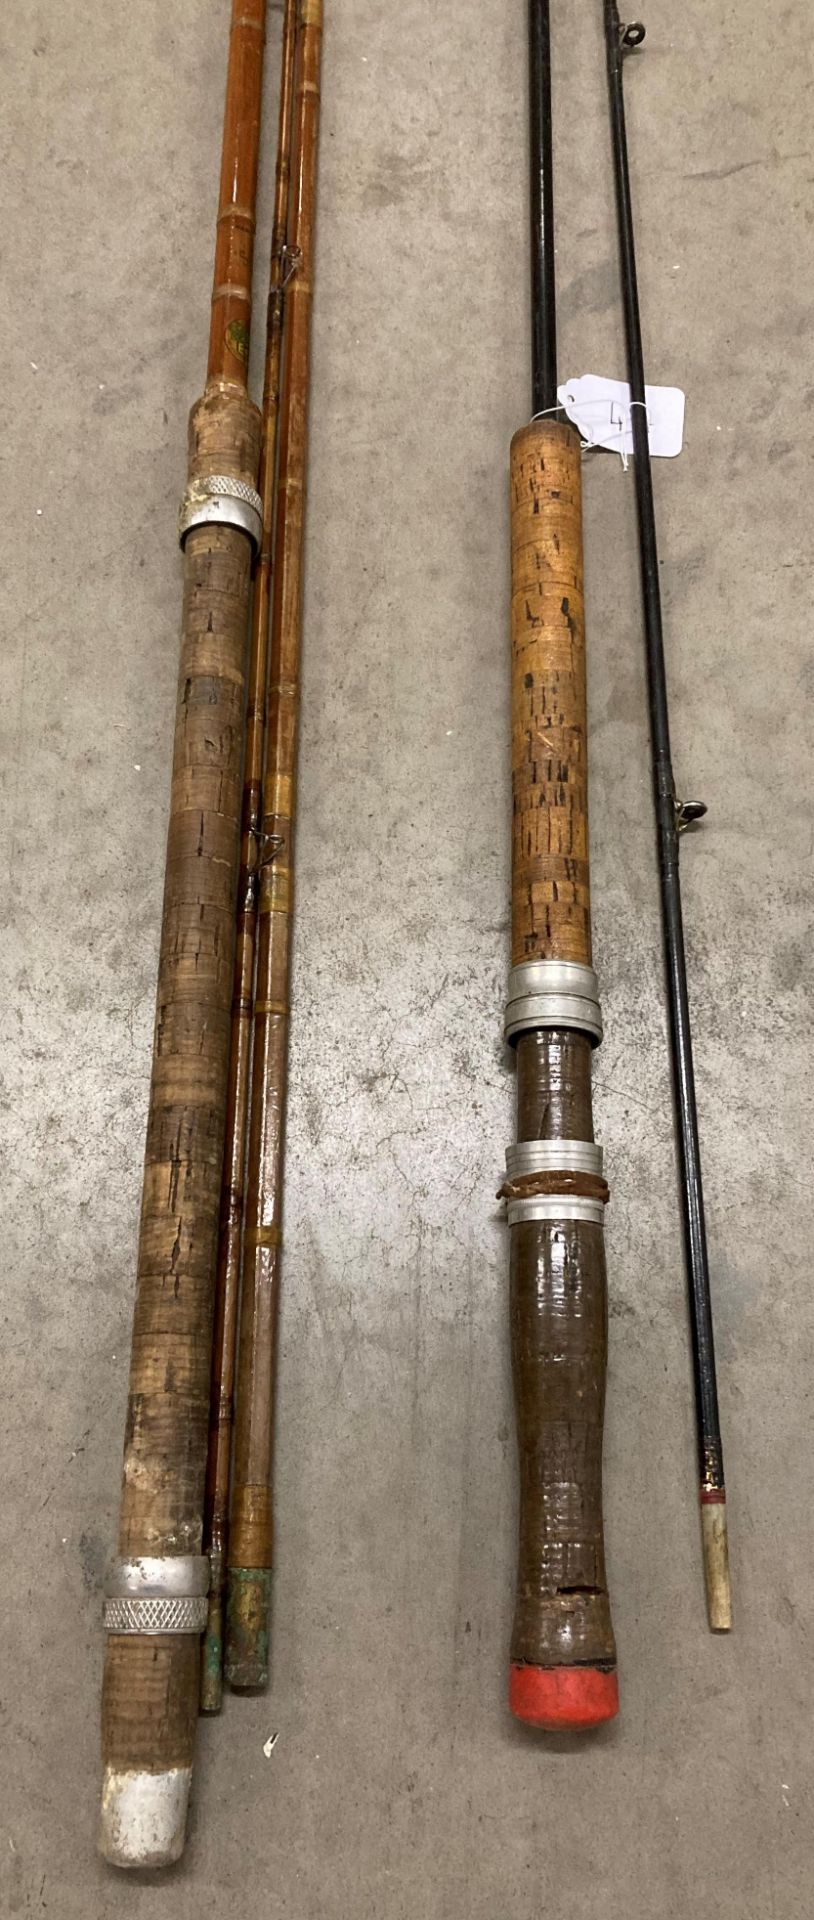 Two vintage fishing rods, - Image 2 of 3